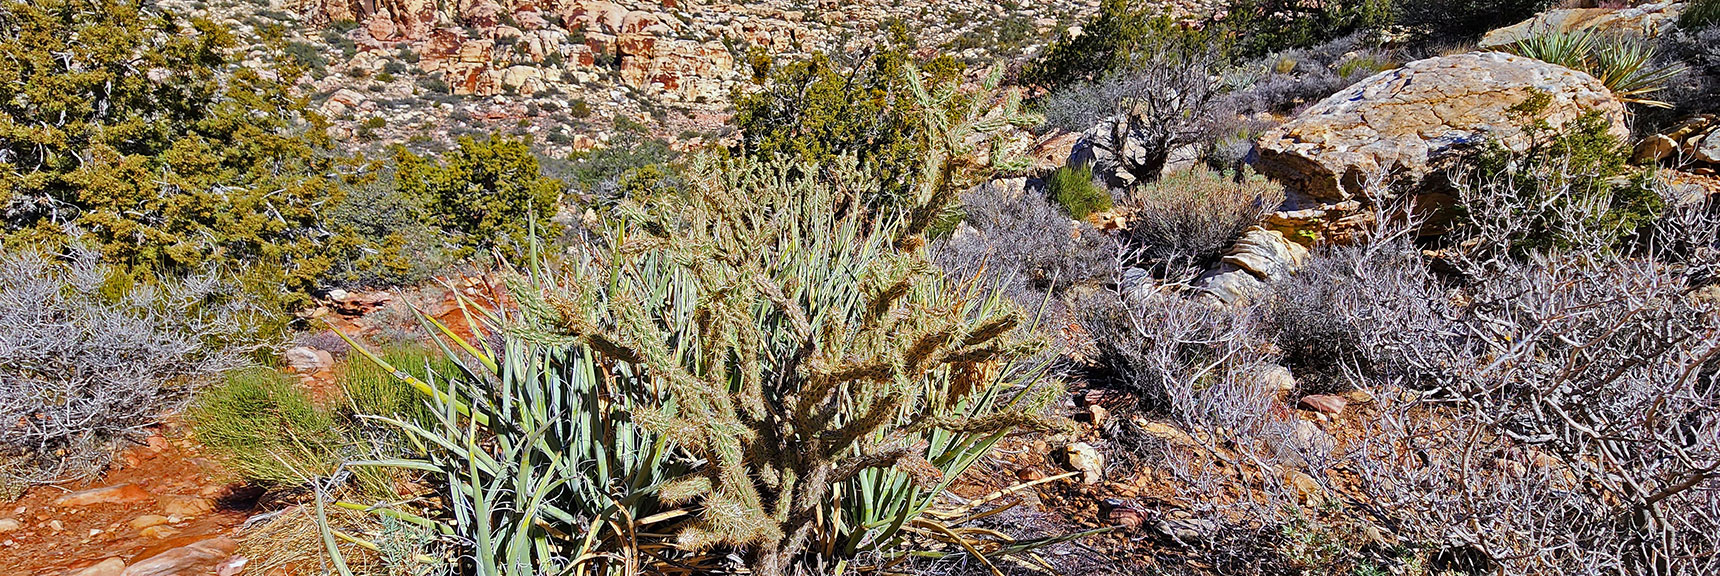 More Cactus on West Side of White Rock Mountain: Note Climate Zone Change | White Rock Mountain Loop Trail | Red Rock Canyon, Nevada